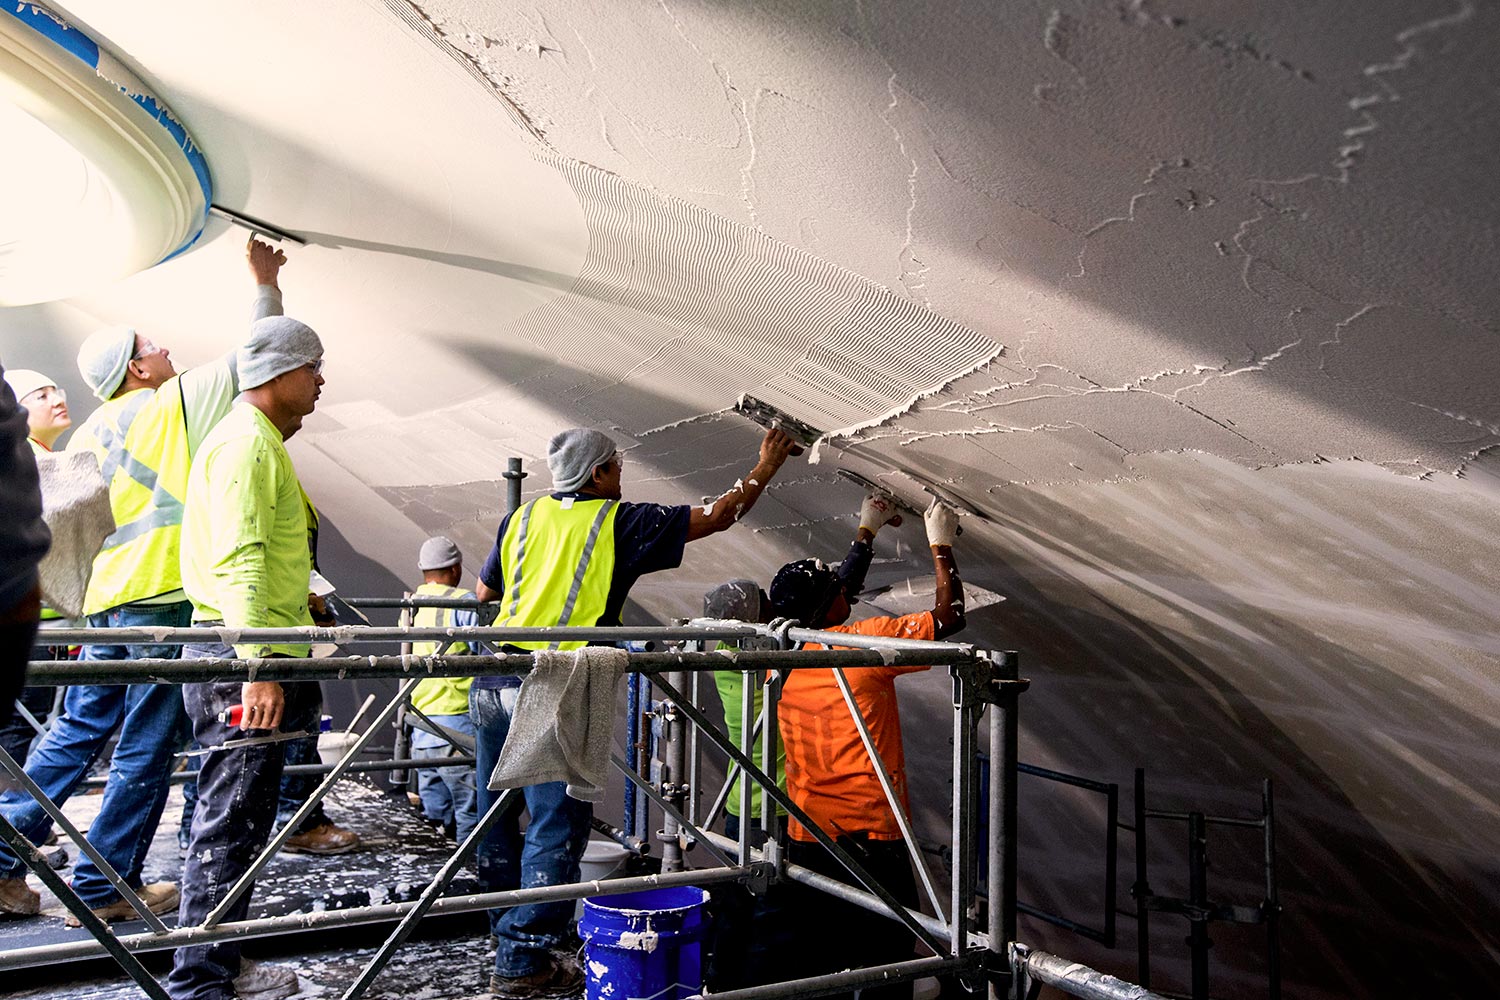 Employees of Interior Specialty Construction, Inc. of Providence Forge, slather plaster on the ceiling of the Rotunda’s Dome Room.